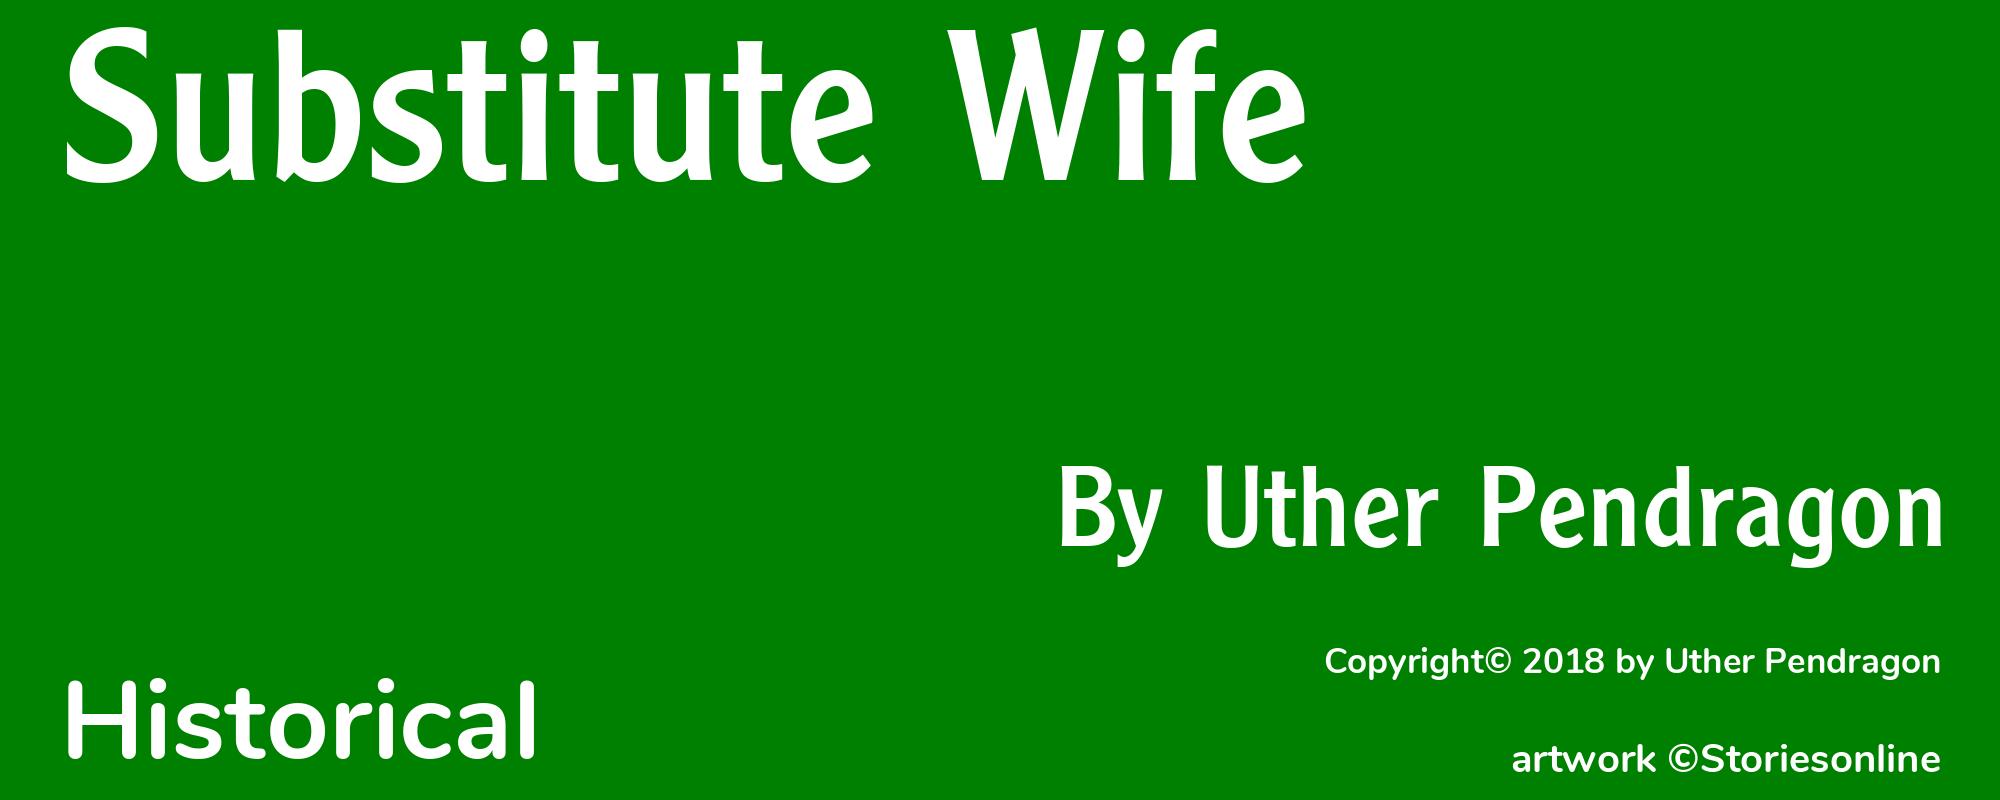 Substitute Wife - Cover